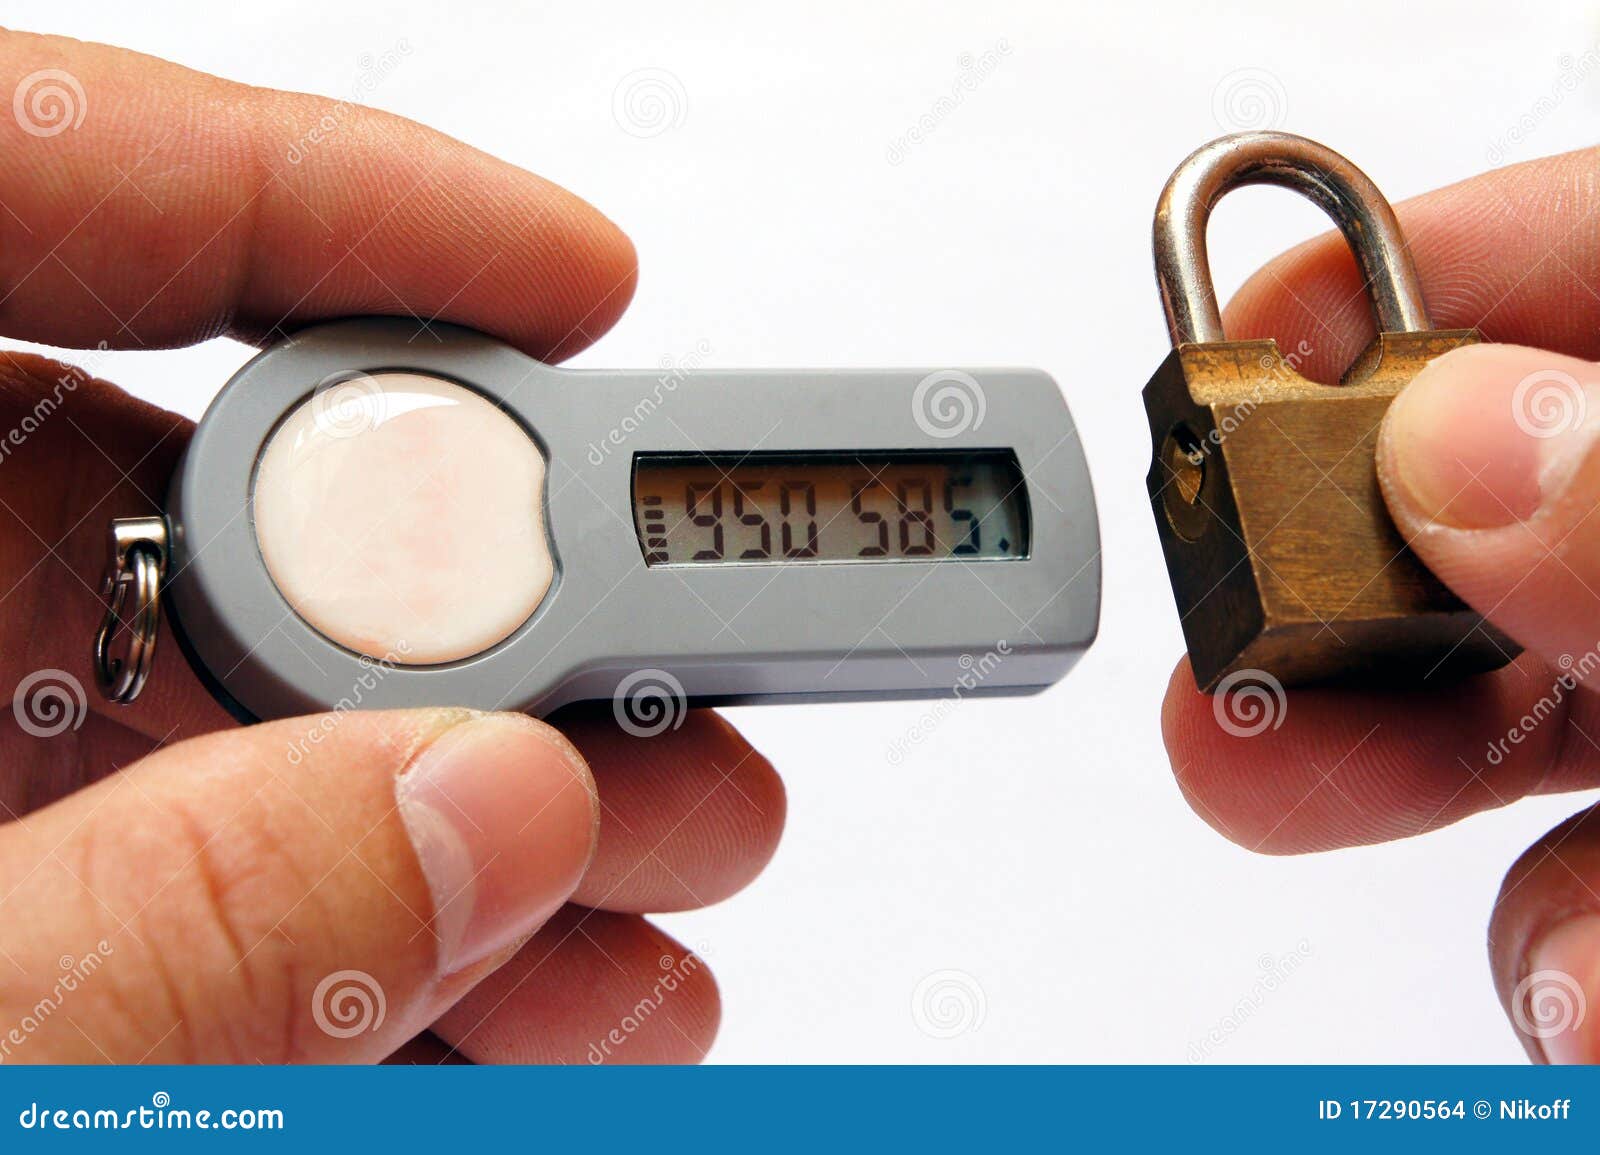 ELECTRONIC TOKEN Stock Images - Image: 17290564